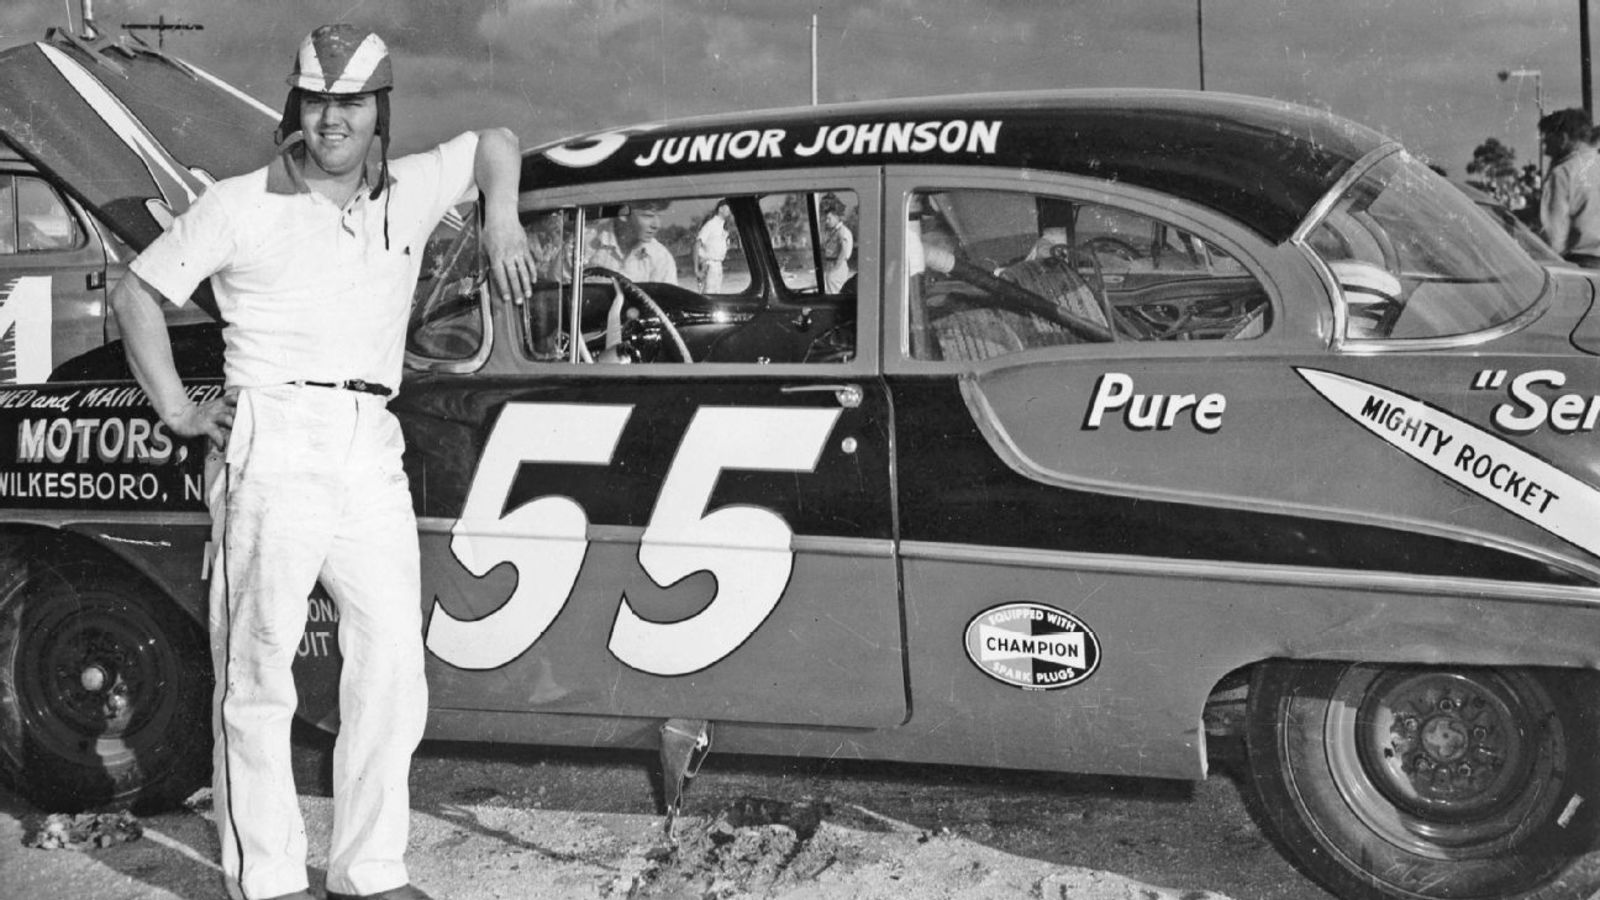 Illustration for article titled Never Caught me A Haulin NASCAR and Moonshine Legend Junior Johnson has died at 88